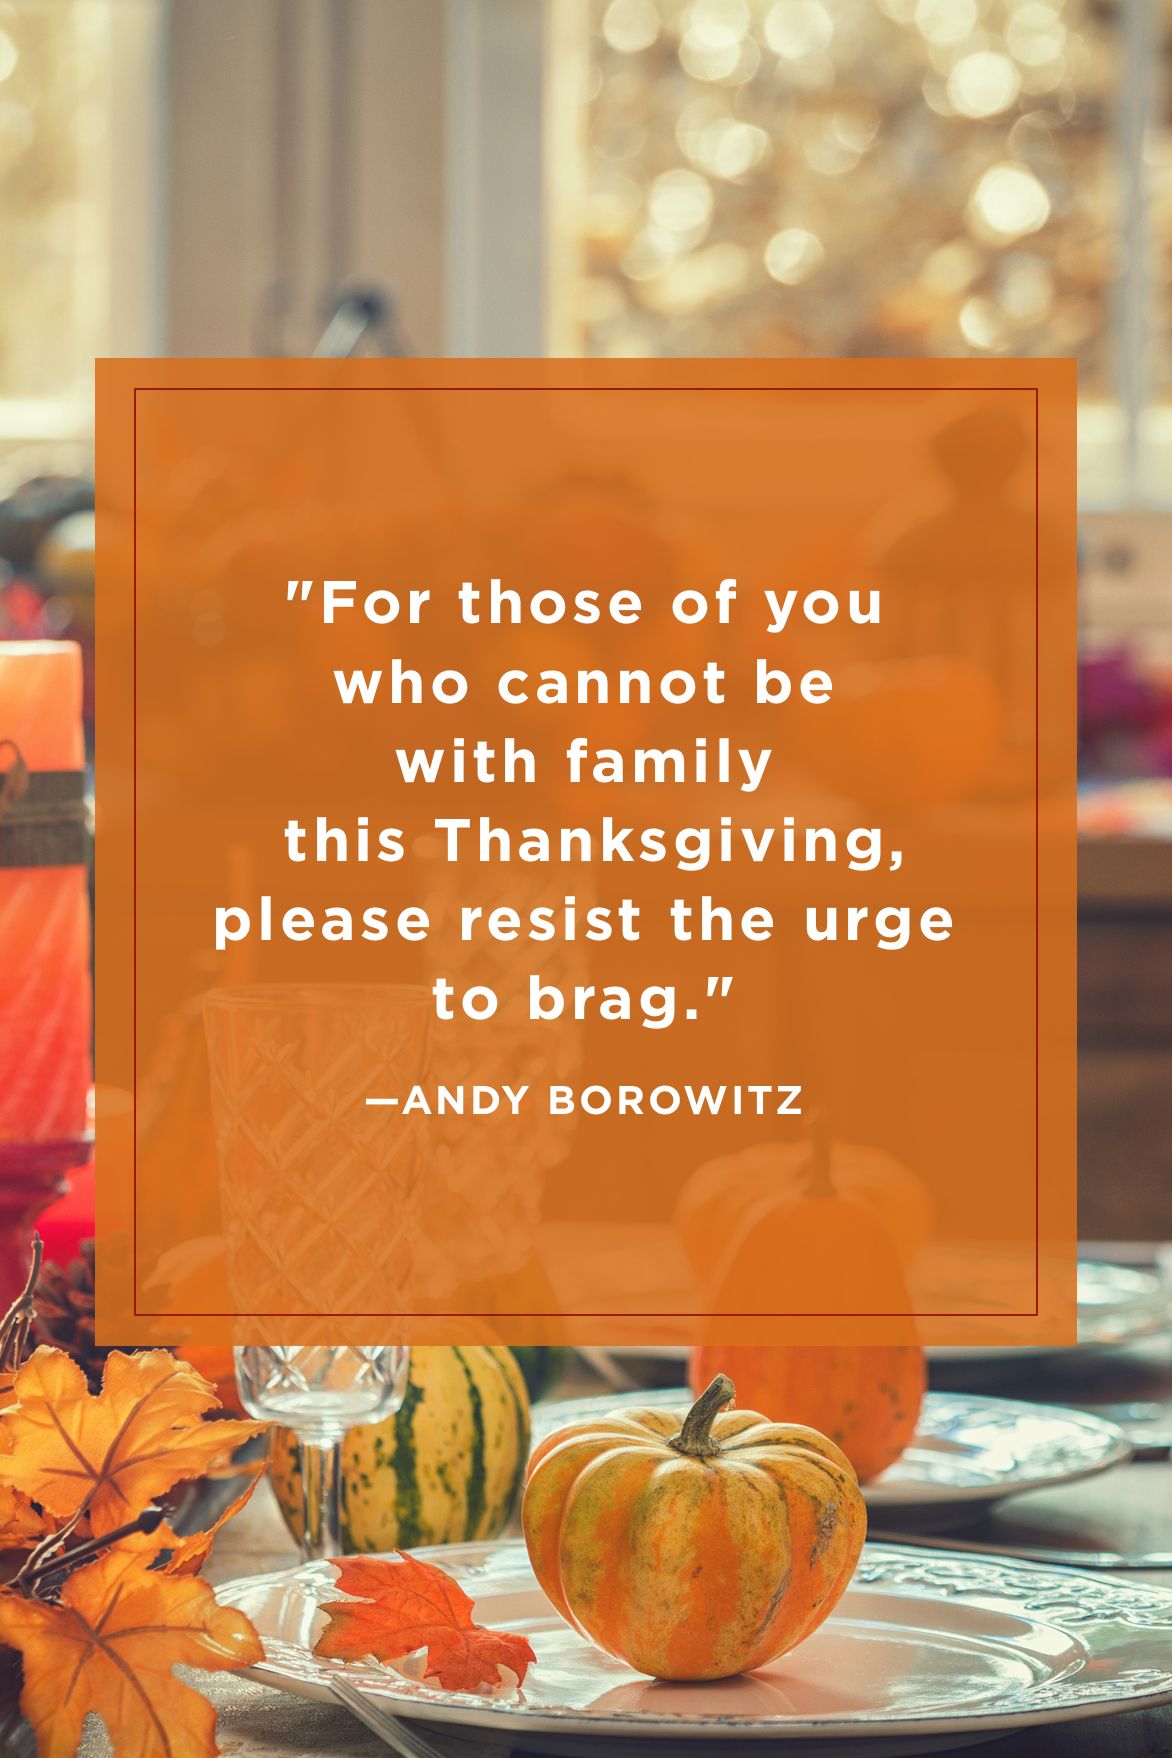 45 Funny Thanksgiving Quotes - Short and Happy Quotes About Thanksgiving Day